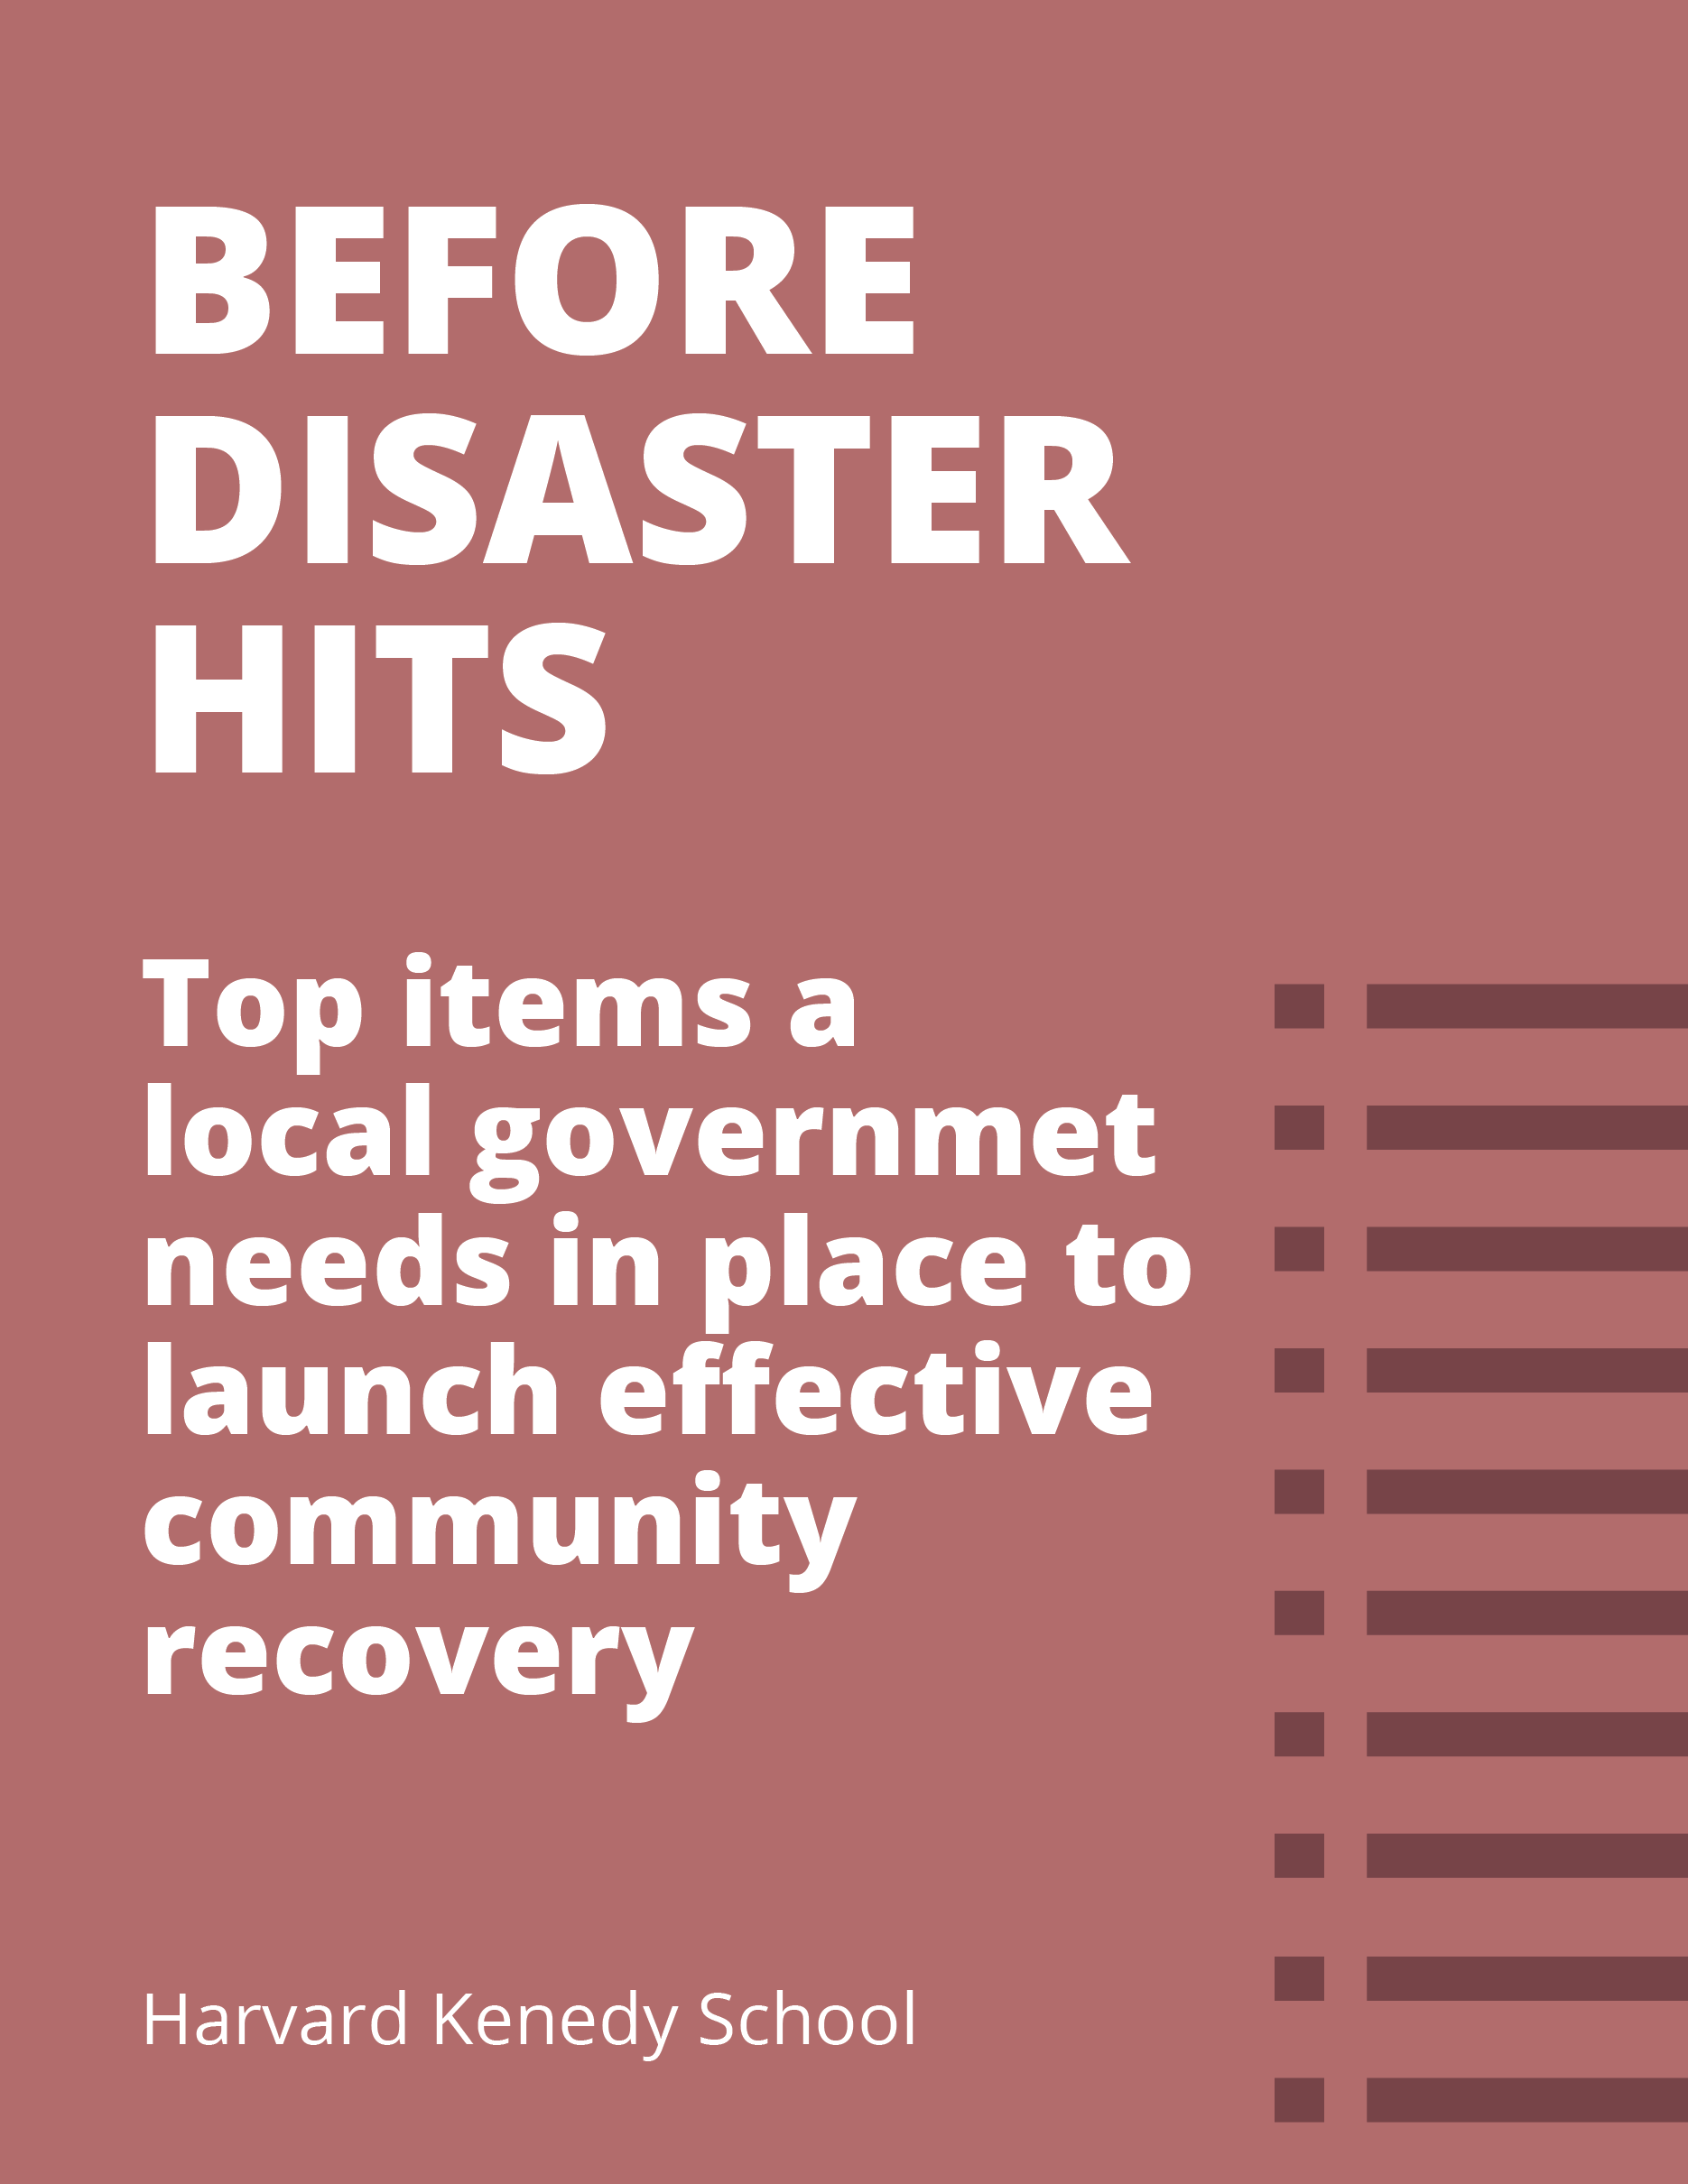 Pre-Disaster Recovery Planning Toolkit for Local Governments